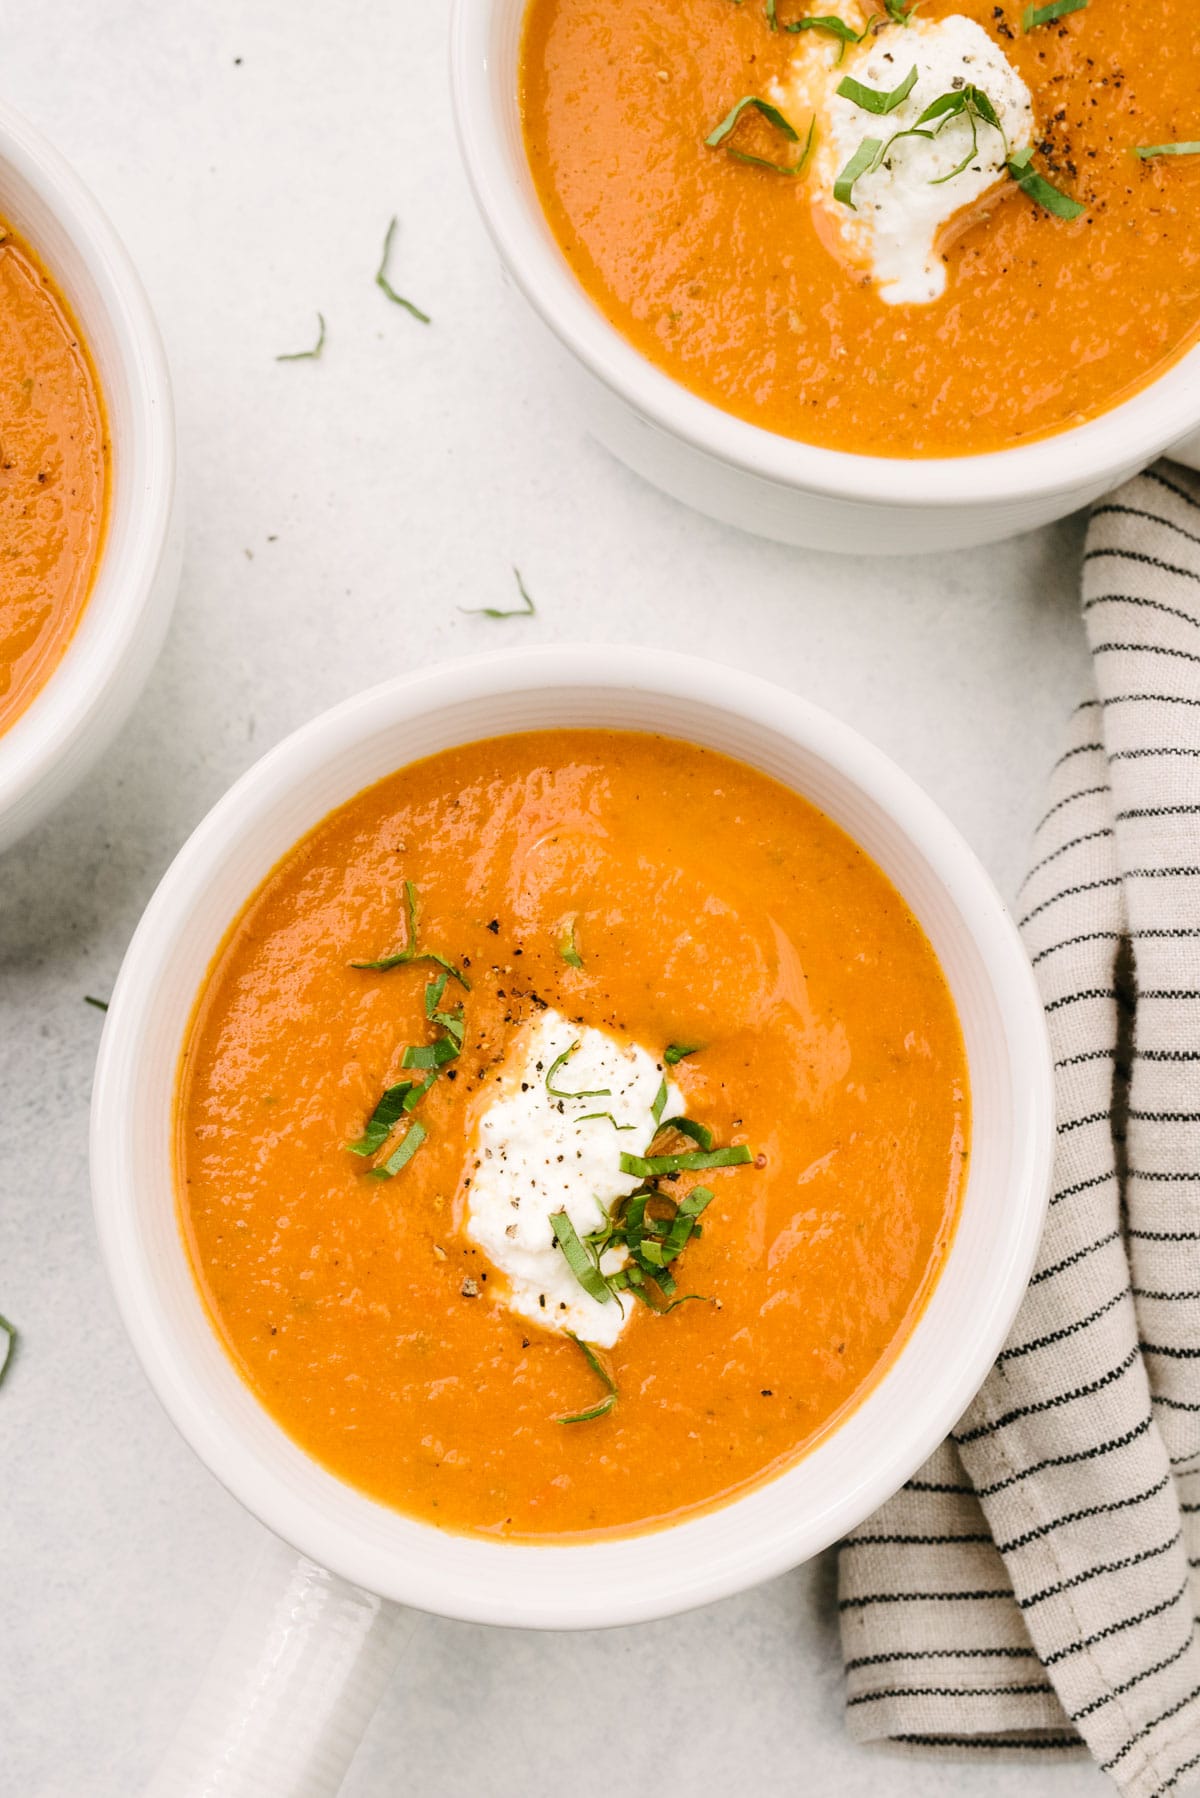 Three bowls of fresh tomato soup on a concrete background; each bowl is garnished with ricotta cheese and fresh basil, with a striped linen napkin tucked to the side.